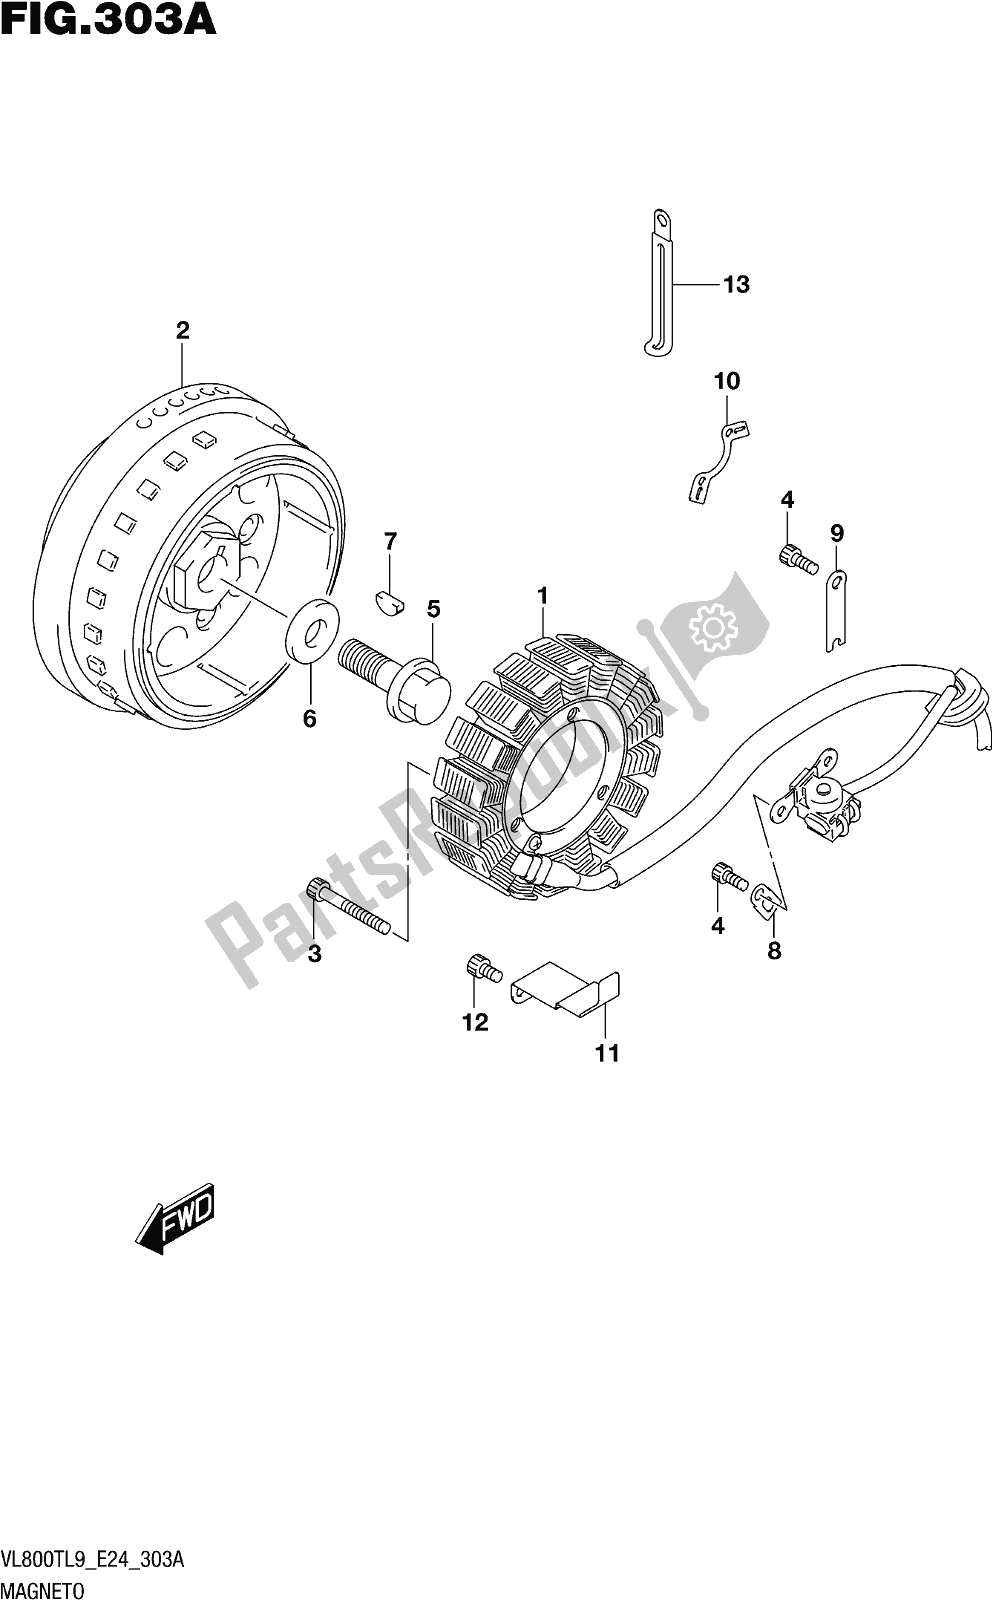 All parts for the Fig. 303a Magneto of the Suzuki VL 800T 2019